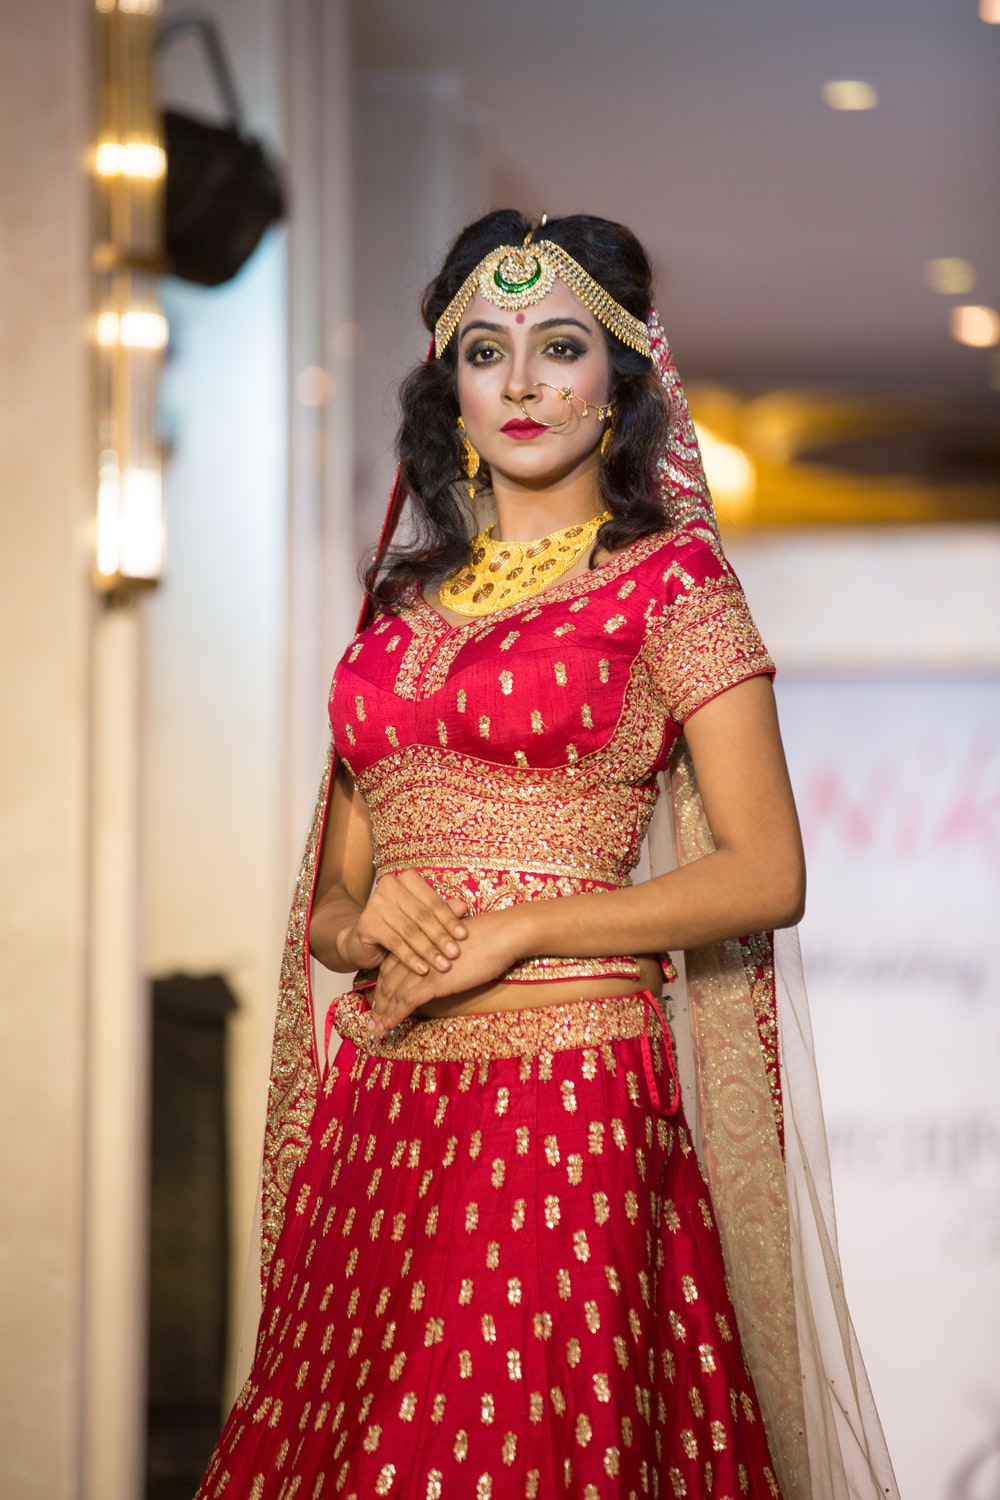 10 Amazing Indian Winter Wedding Outfits to Try - The Kosha Journal